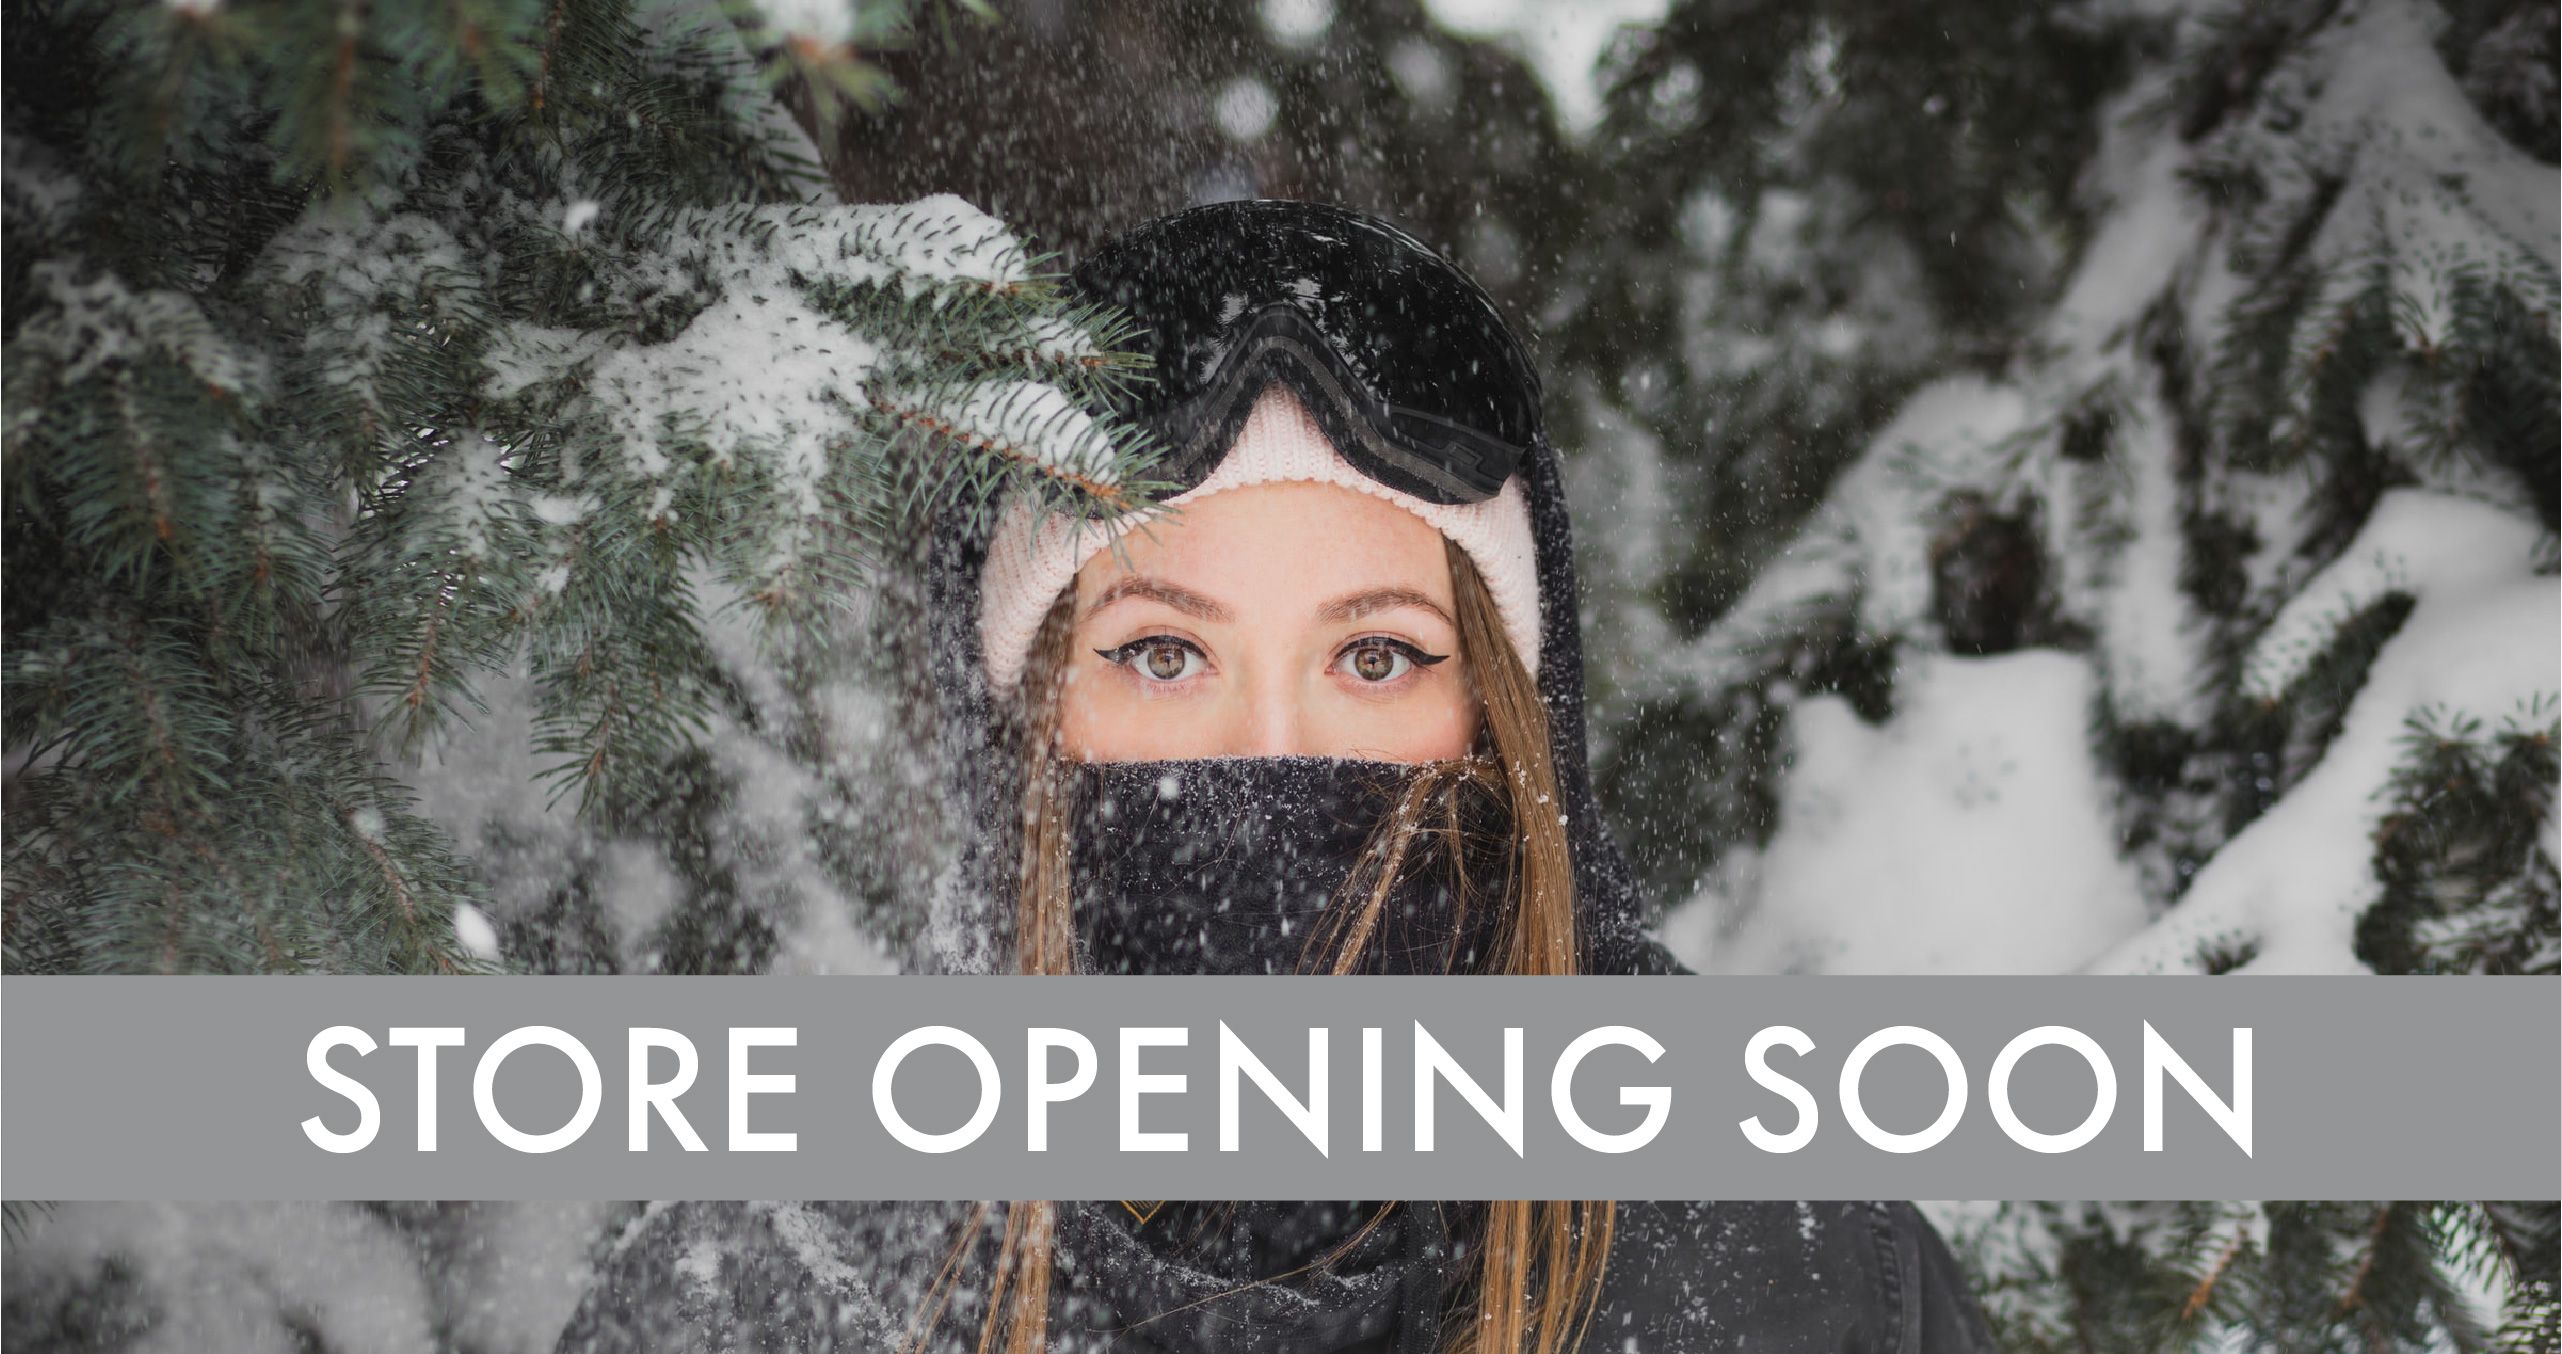 Store_Opening_Soon_Snow_Girl_2x-80